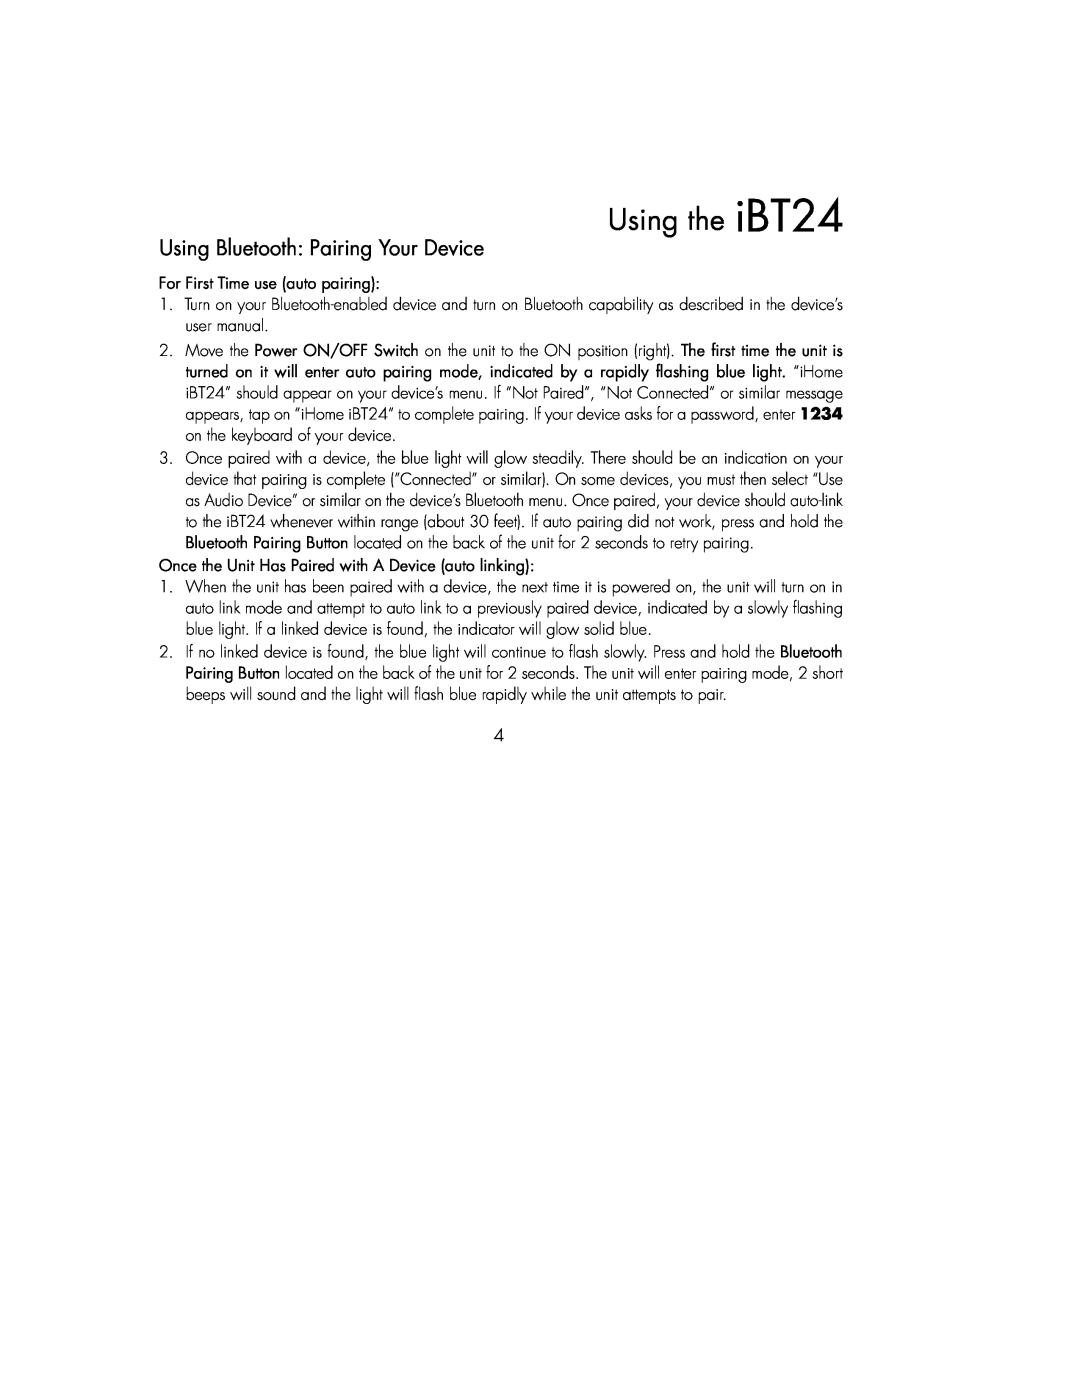 iHome IBT24GC, IBT24UC instruction manual Using the iBT24, Using Bluetooth Pairing Your Device 